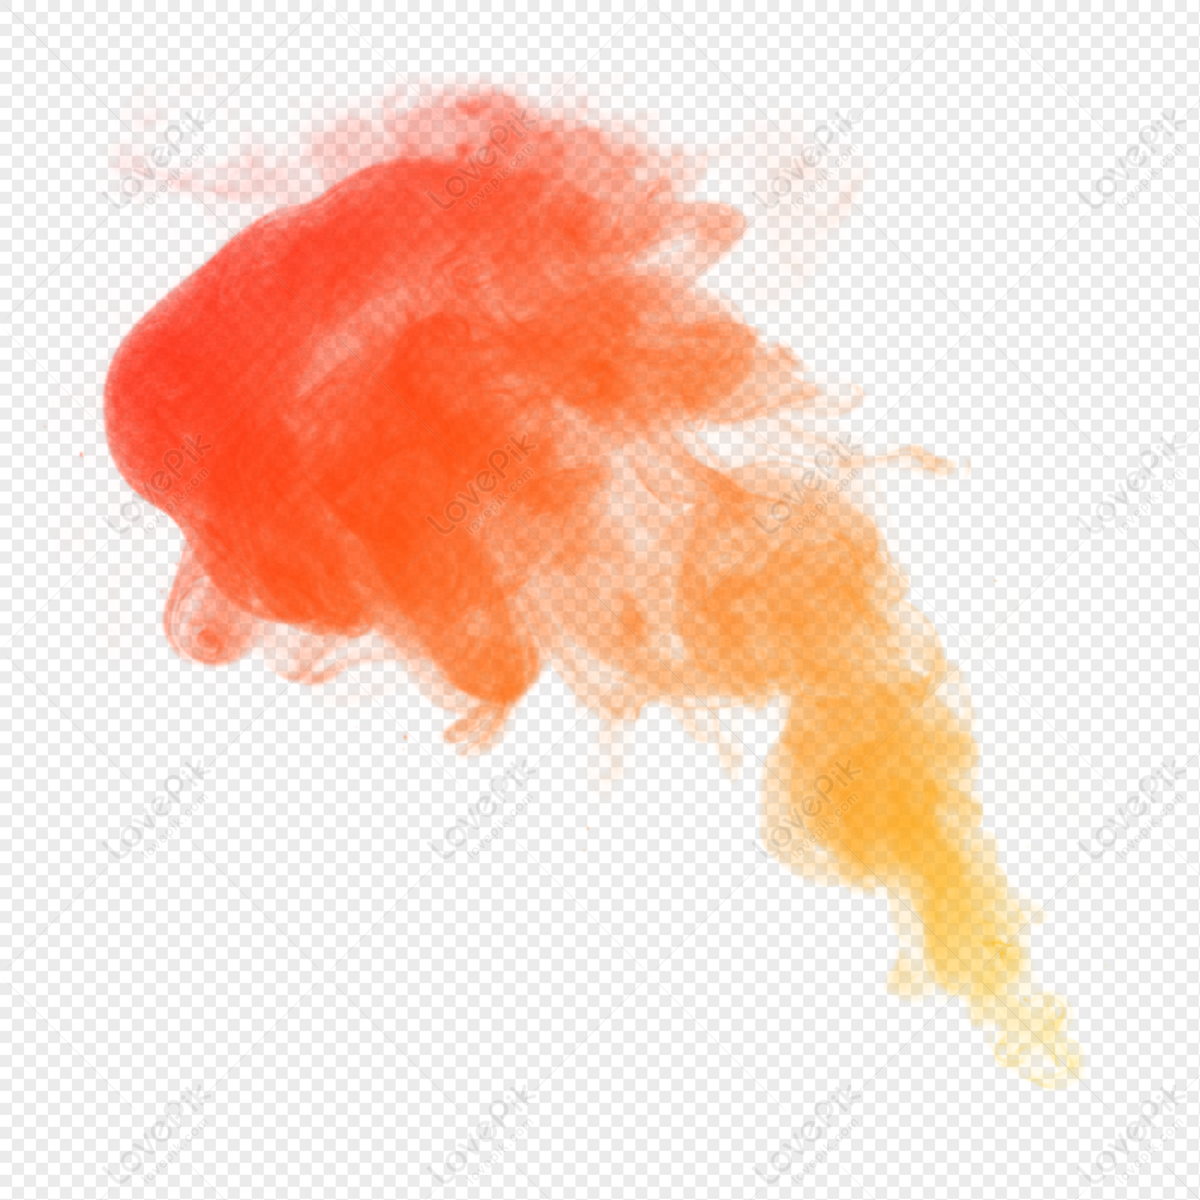 Colored Smoke Free PNG And Clipart Image For Free Download - Lovepik |  401472289